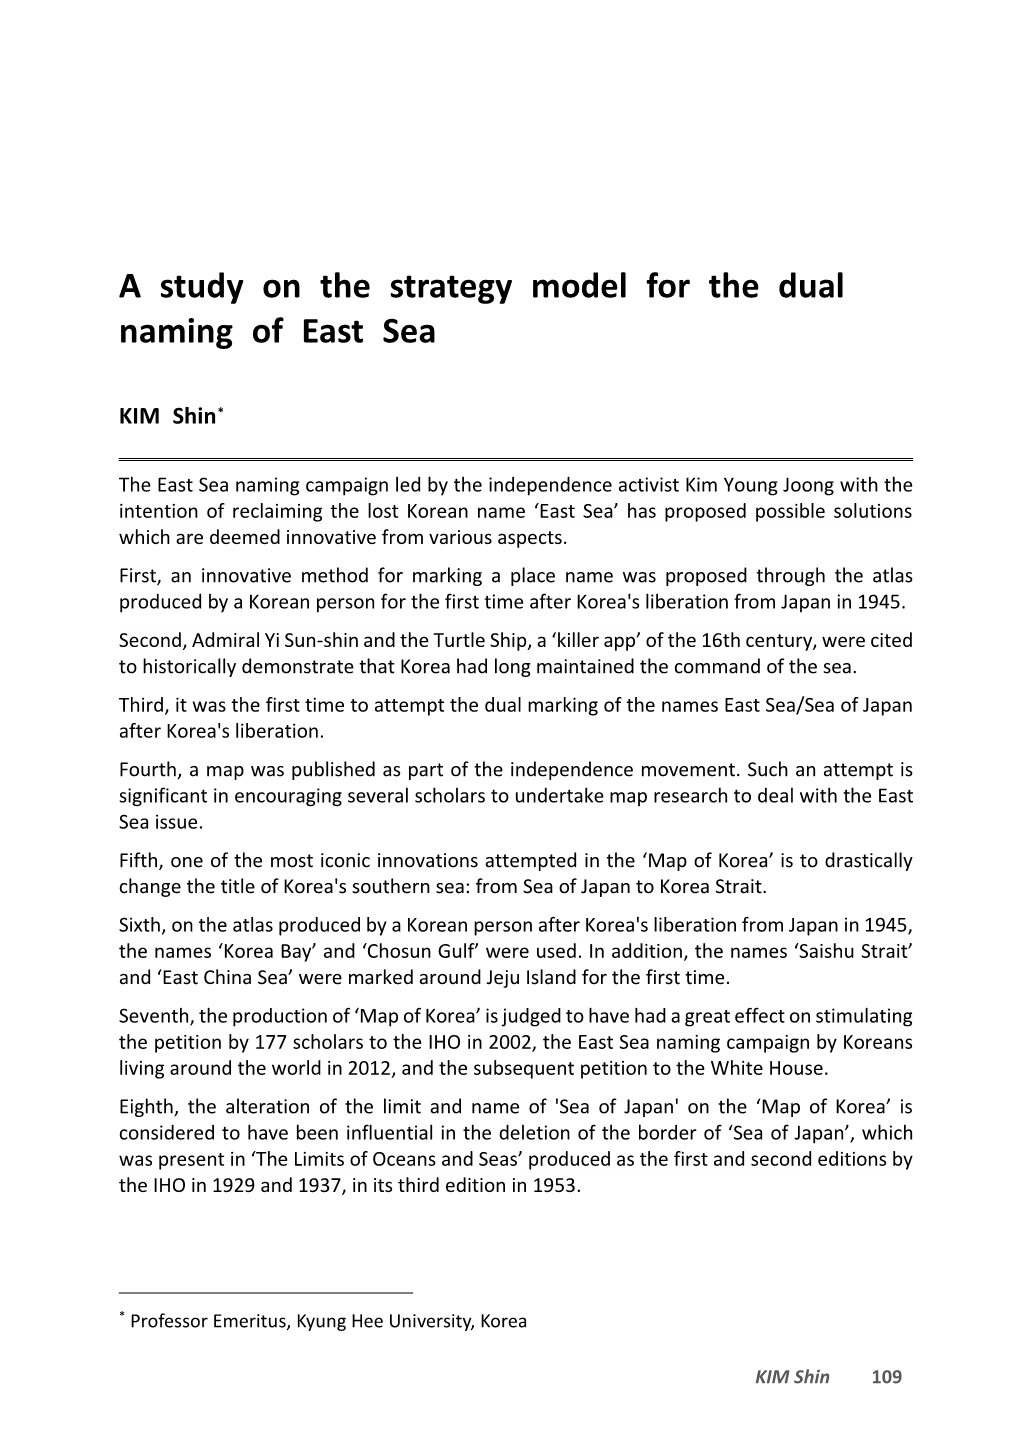 A Study on the Strategy Model for the Dual Naming of East Sea